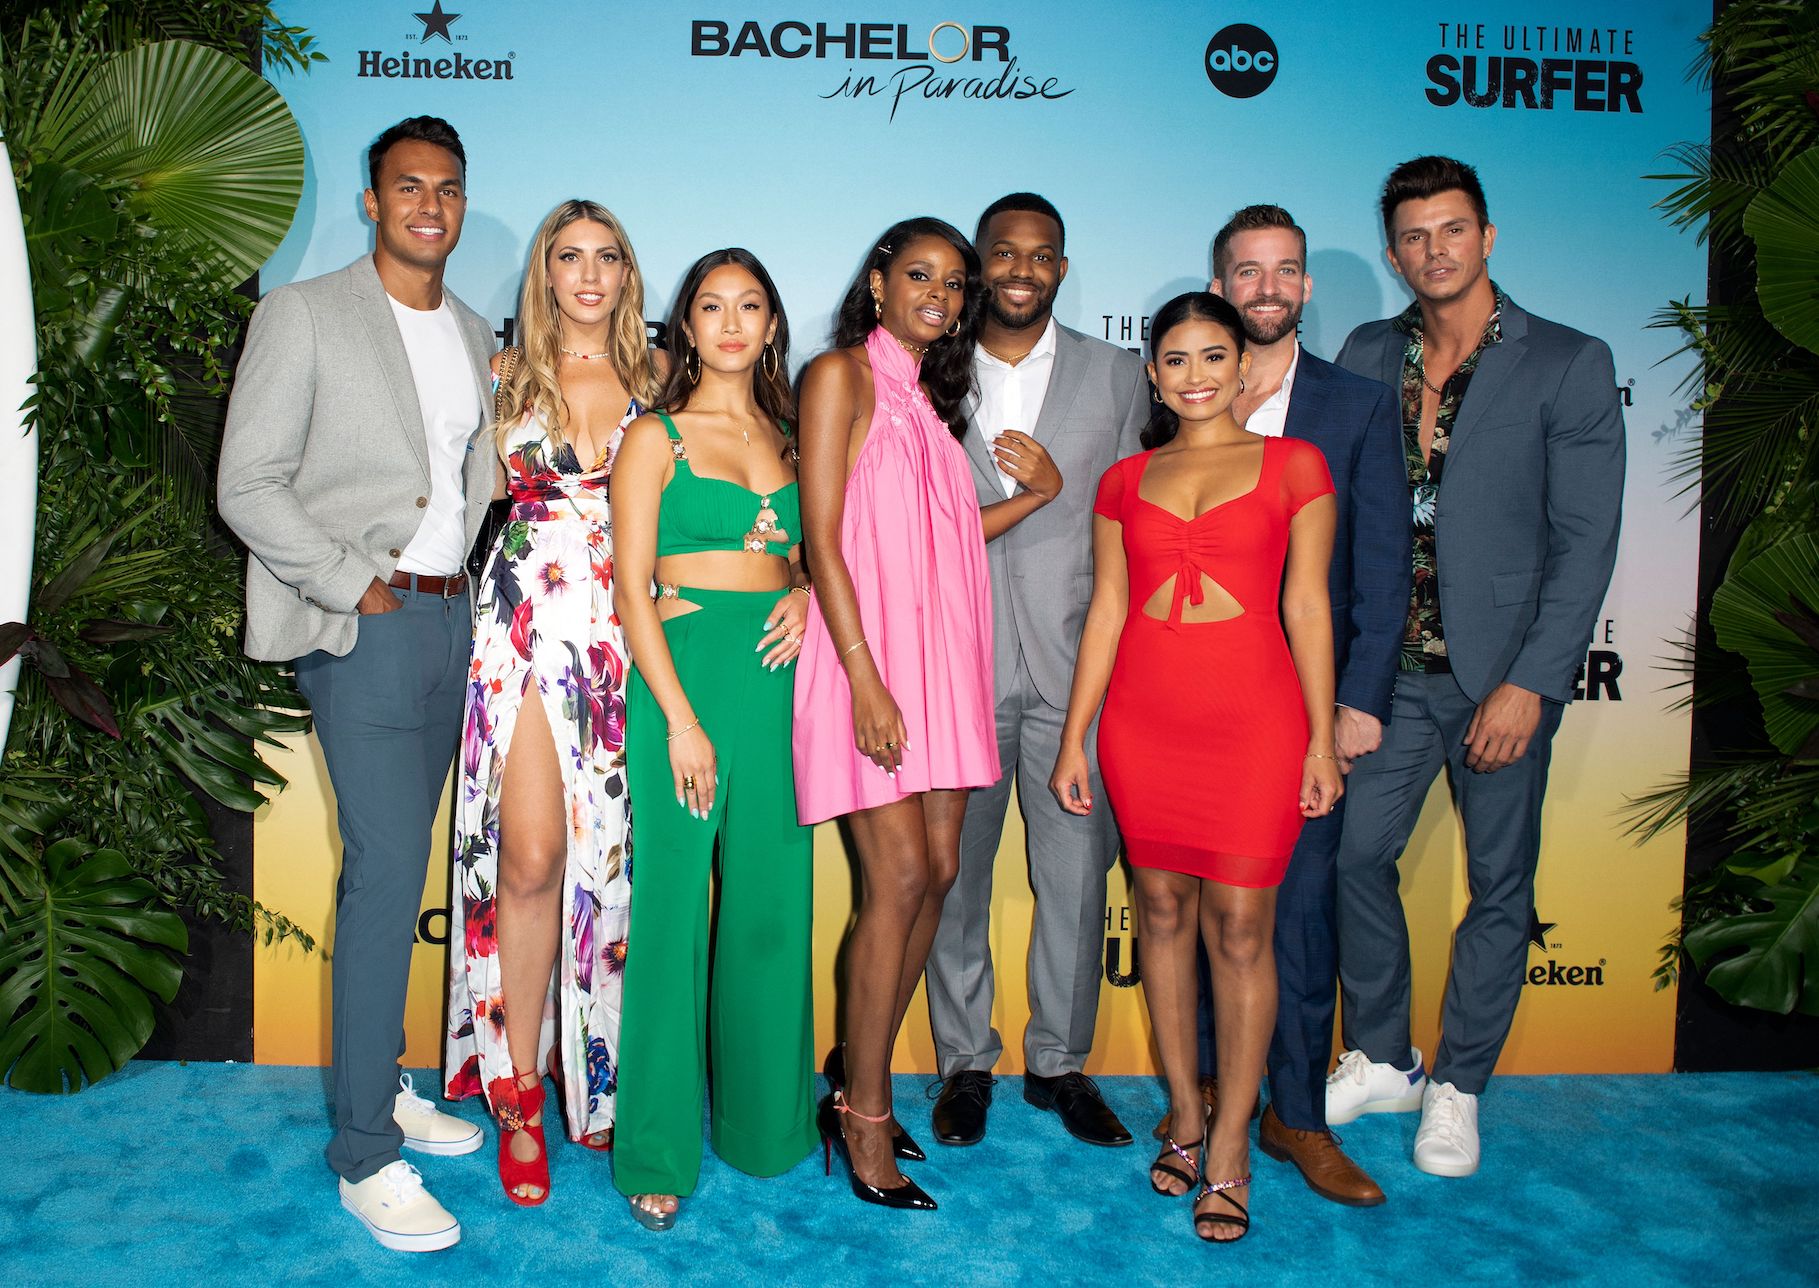 'Bachelor in Paradise' Season 7 cast standing together at an event